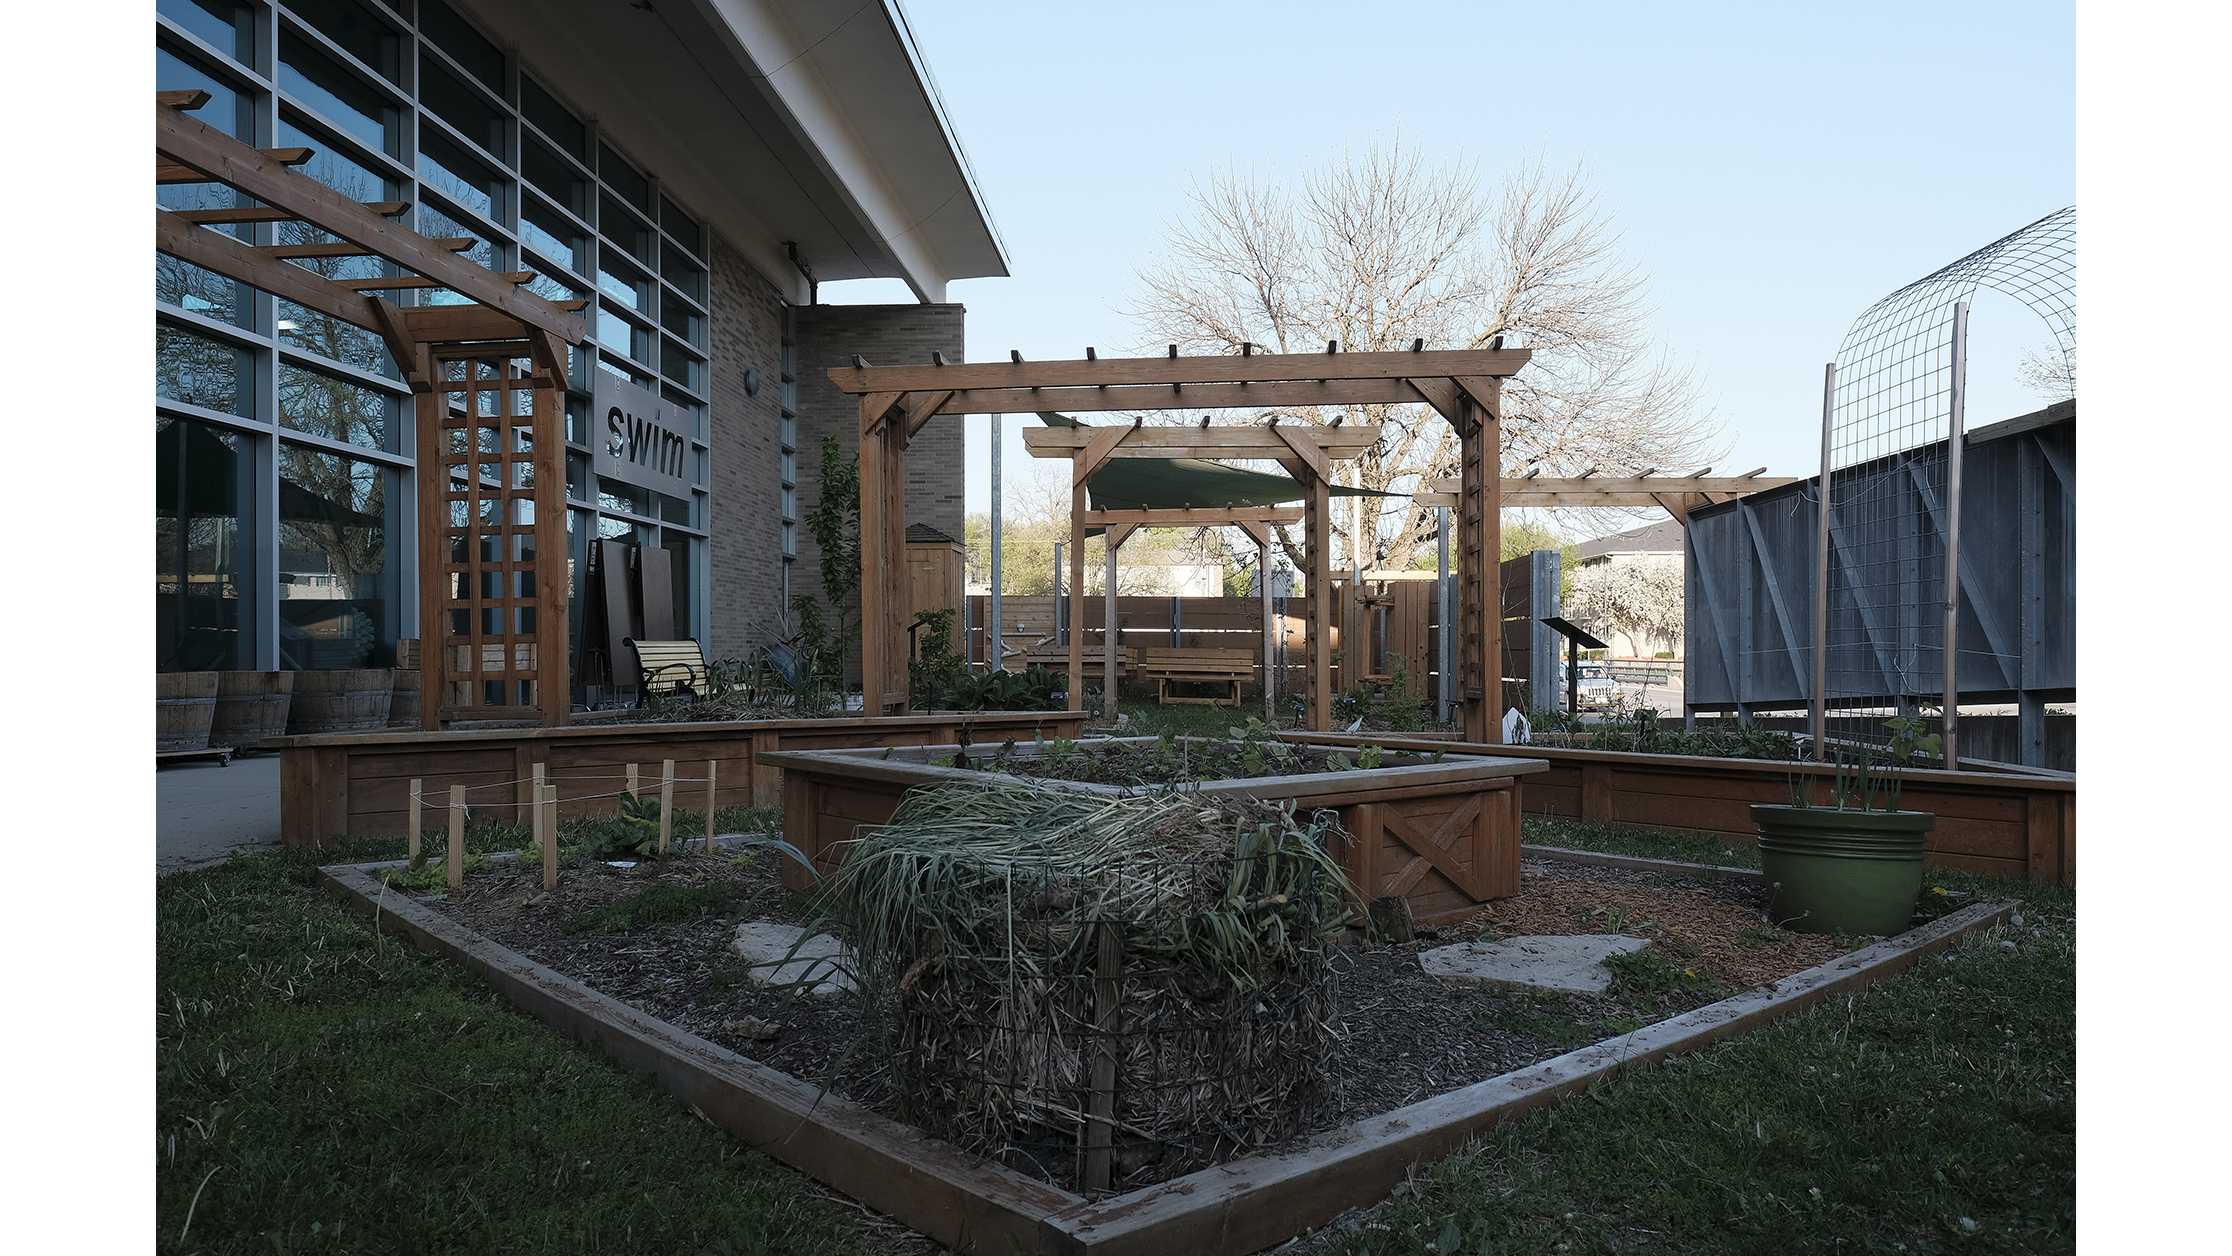 The garden classroom at the Robert A Lee recreation Center is seen on Monday, May 5, 2018. The classroom will be the location of a new butterfly tent. (Nick Rohlman/The Daily Iowan)